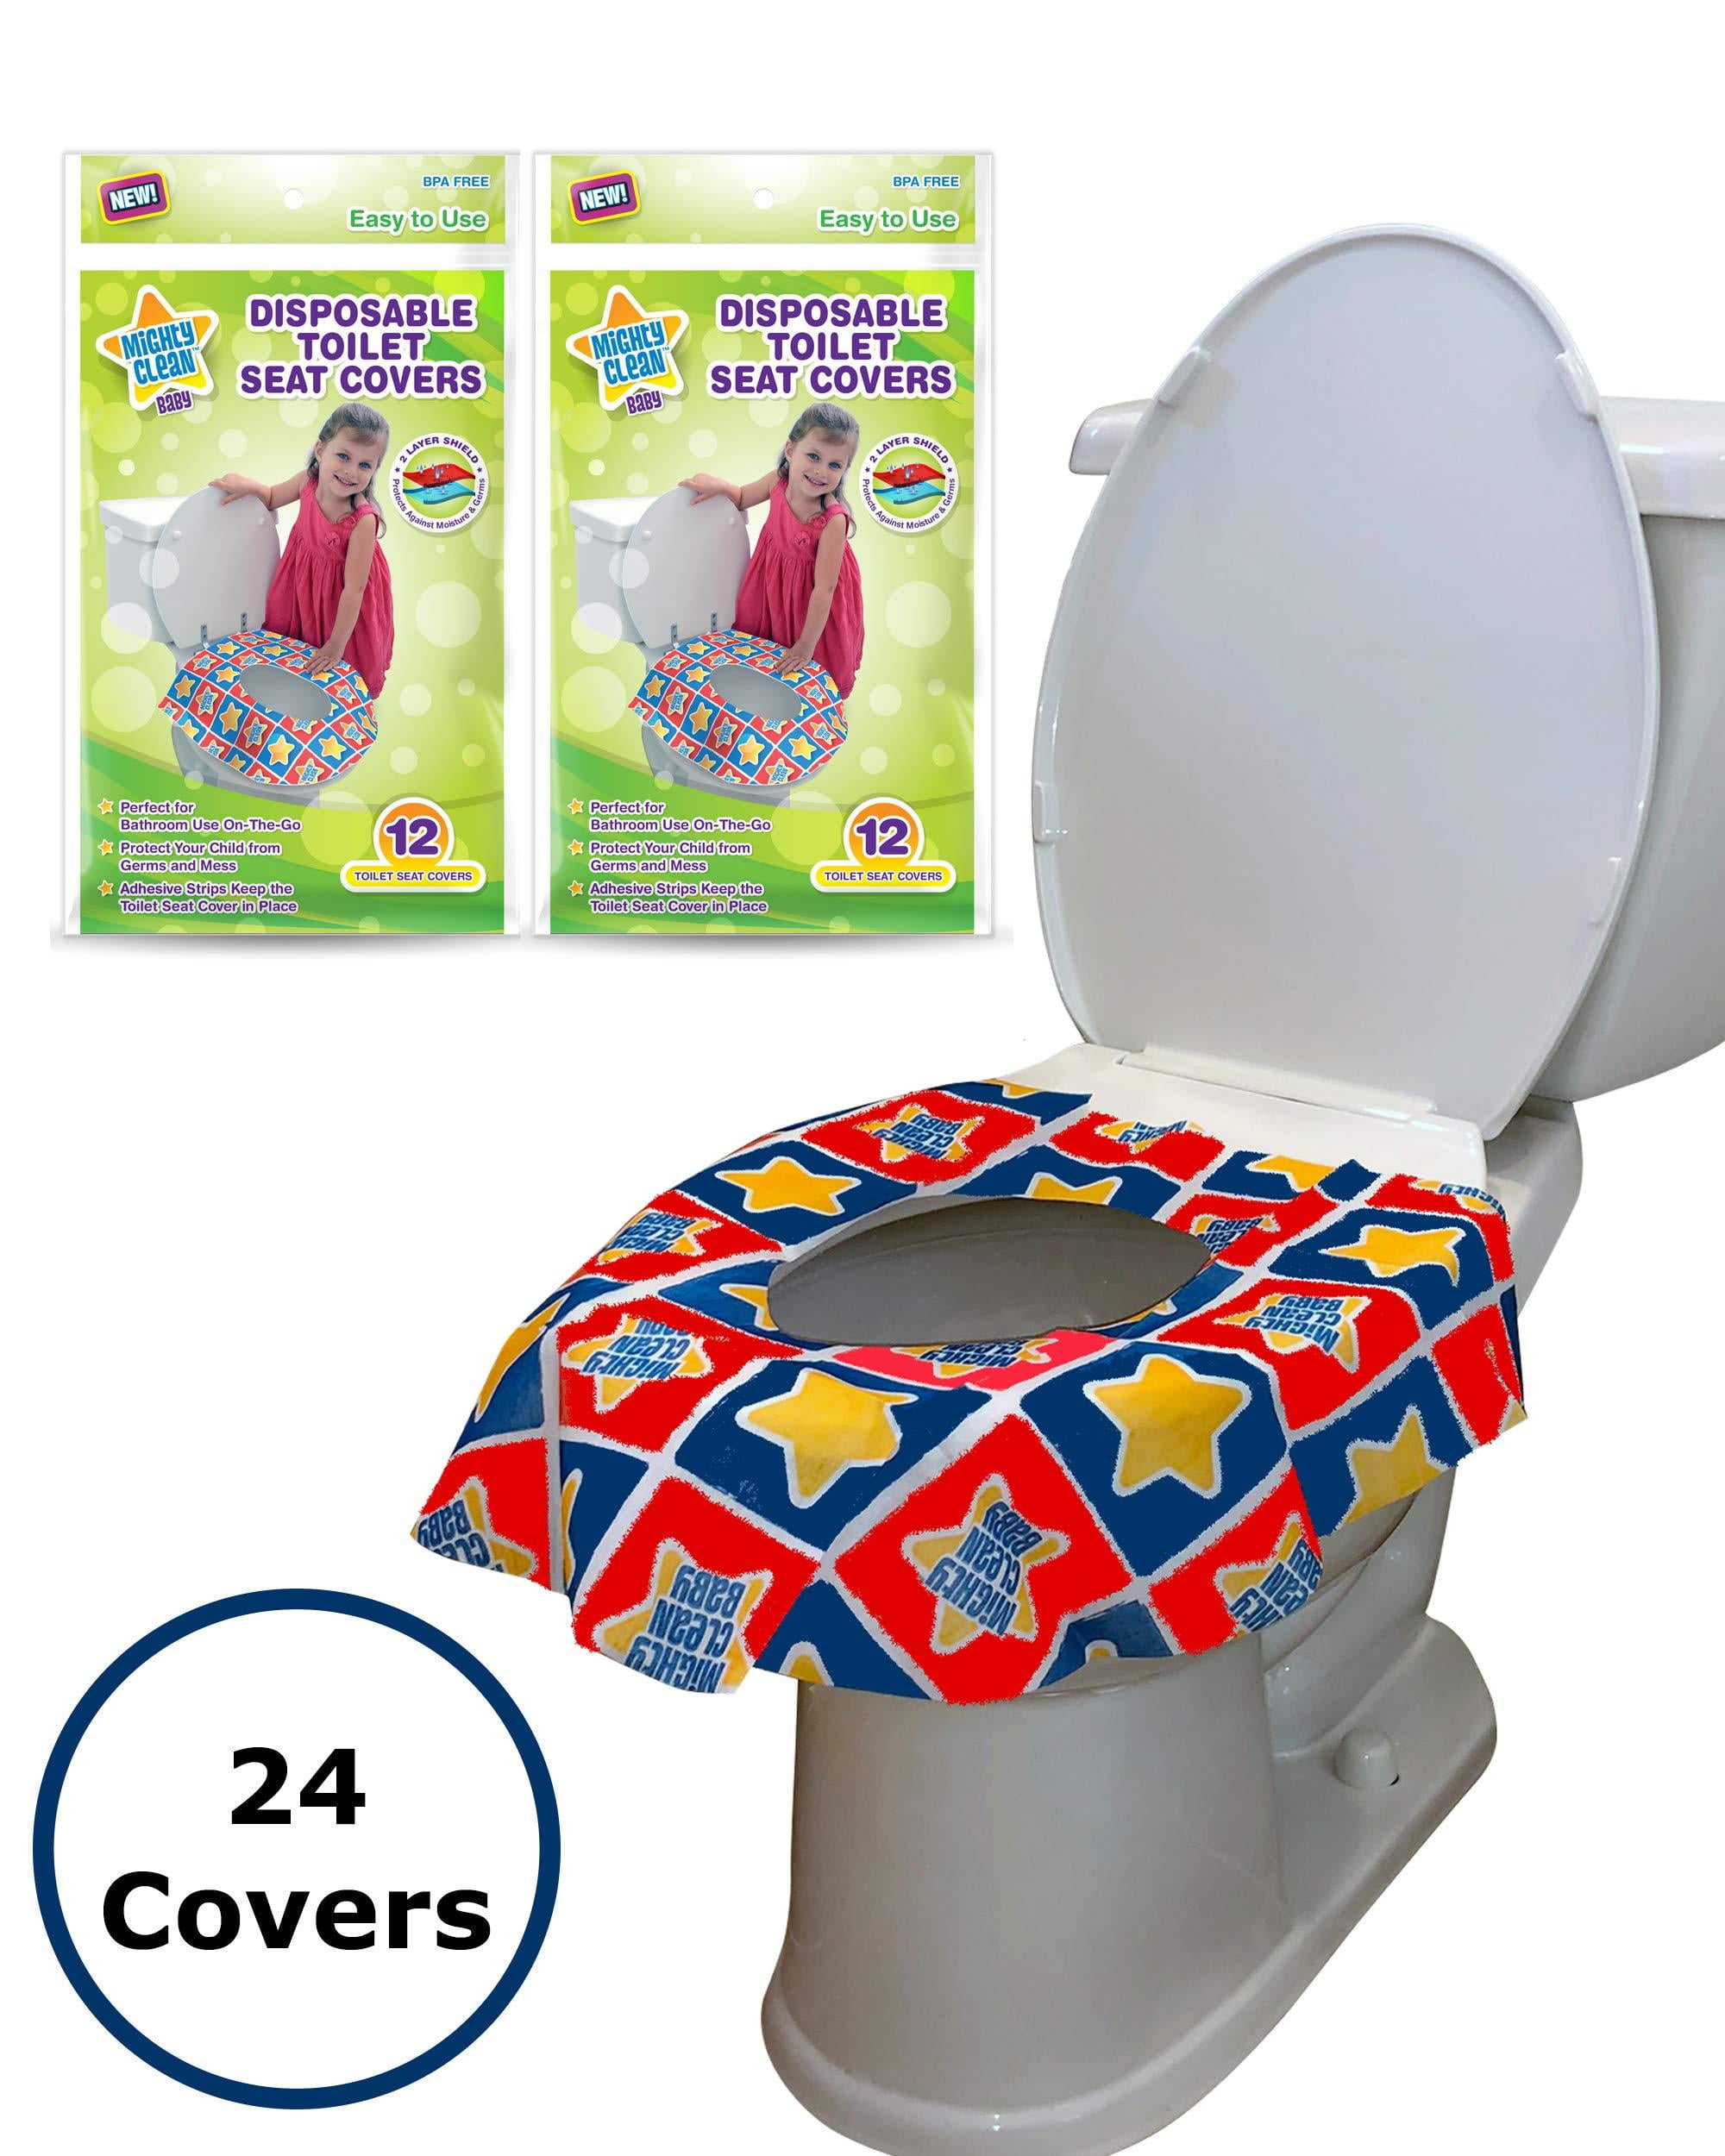 Individually Wrapped Waterproof Covers for Adults and Kids to Use in Public Bathrooms and Potty Training 20 Extra Large Disposable Toilet Seat Covers by Mighty Clean Baby Toddlers 